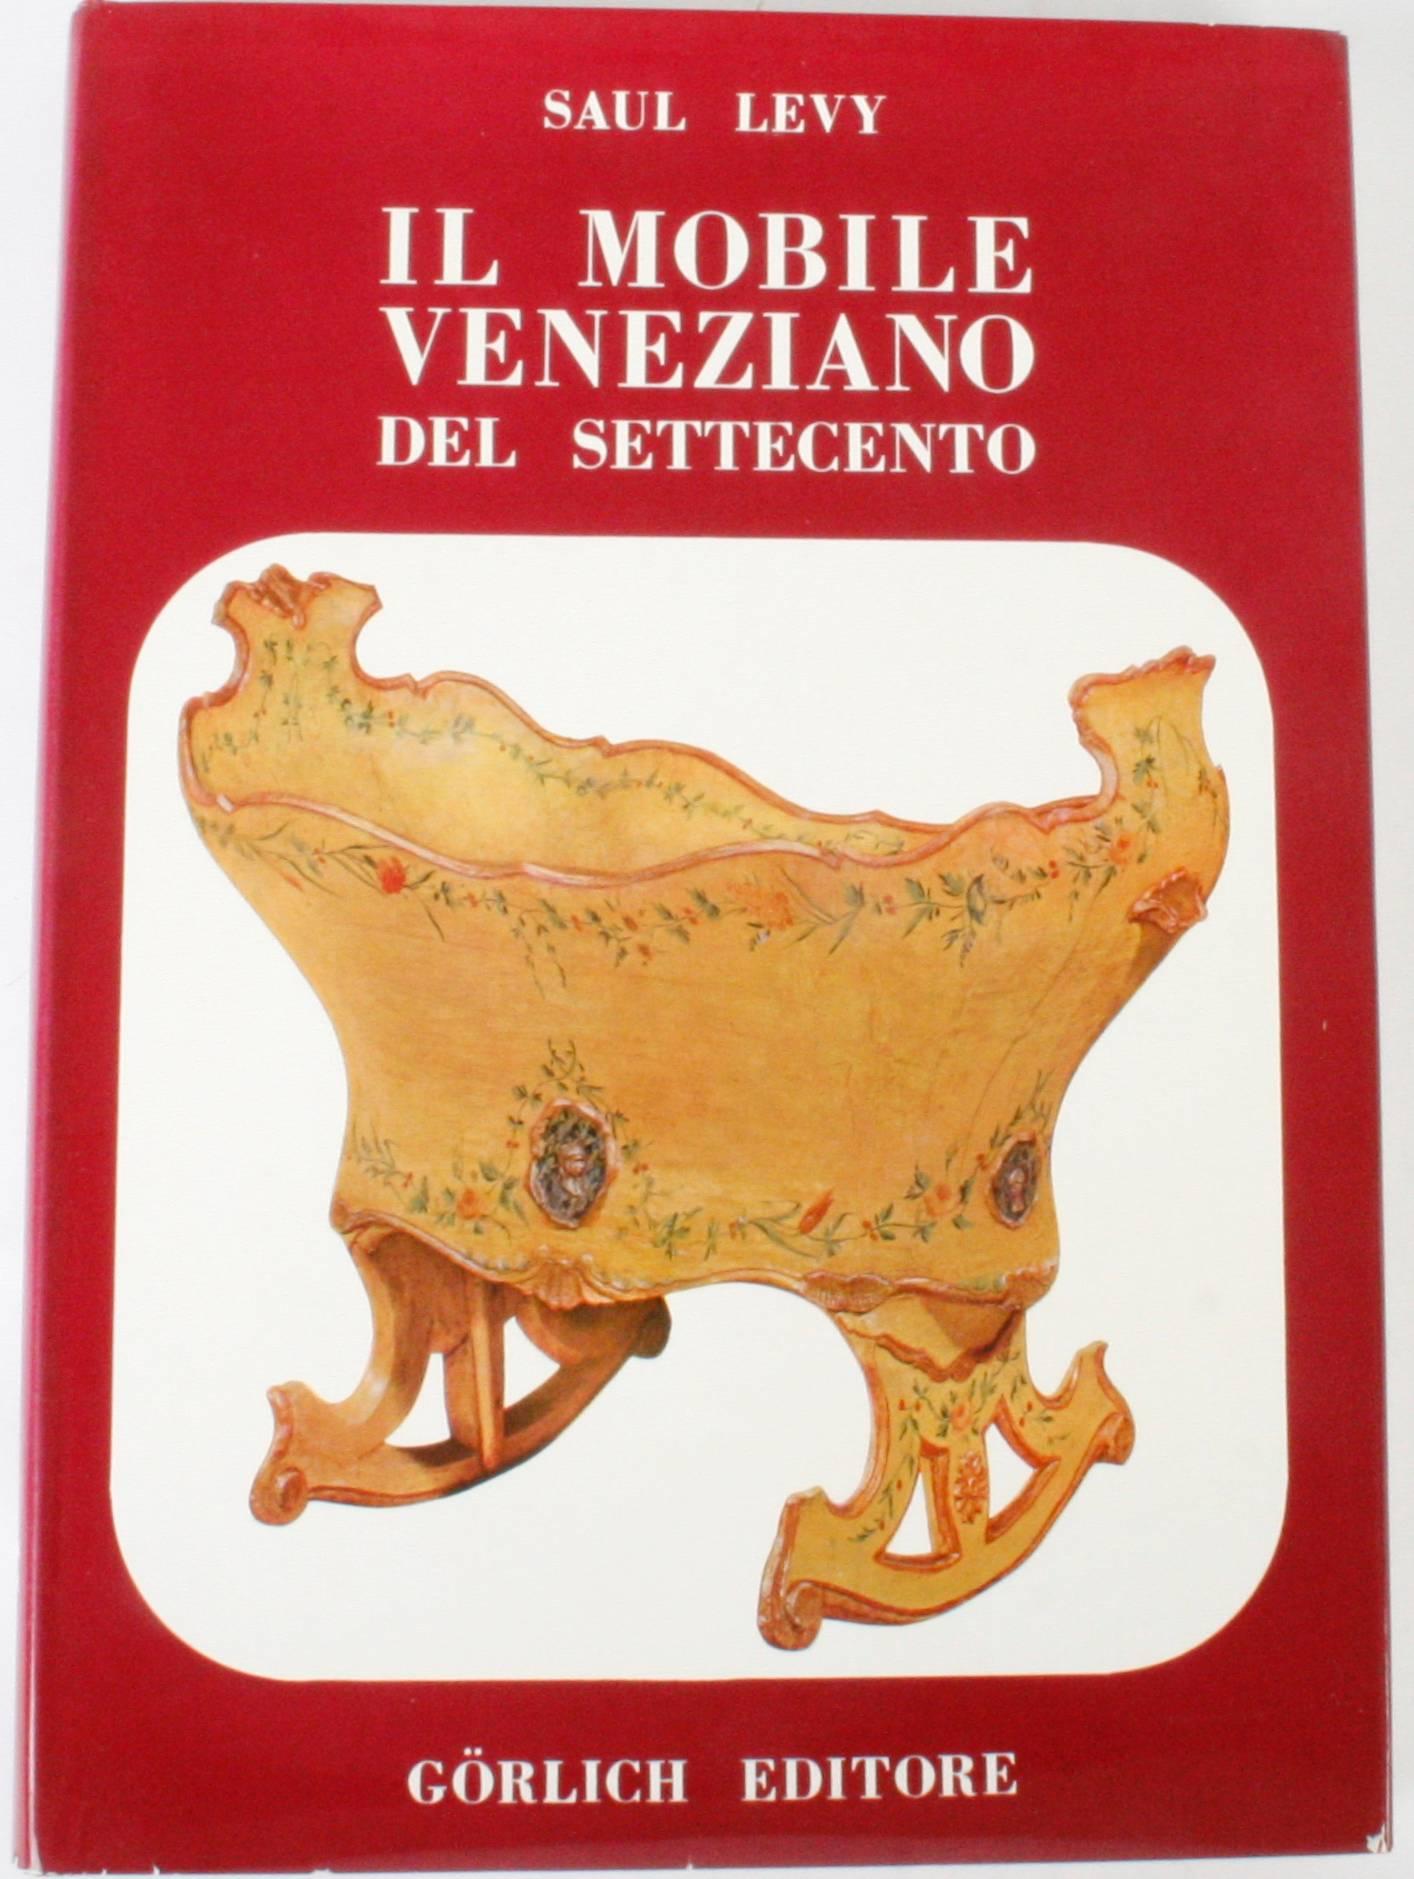 Il Mobile Veneziano del Settecento (Eighteenth Century Venetian Furniture) Volumes I & II by Saul Levy. Milan: G. G. Görlich Editore, 1964. First editions thus hardcovers with dust jackets. Italian text. Unpaginated. An in-depth study of 18th c